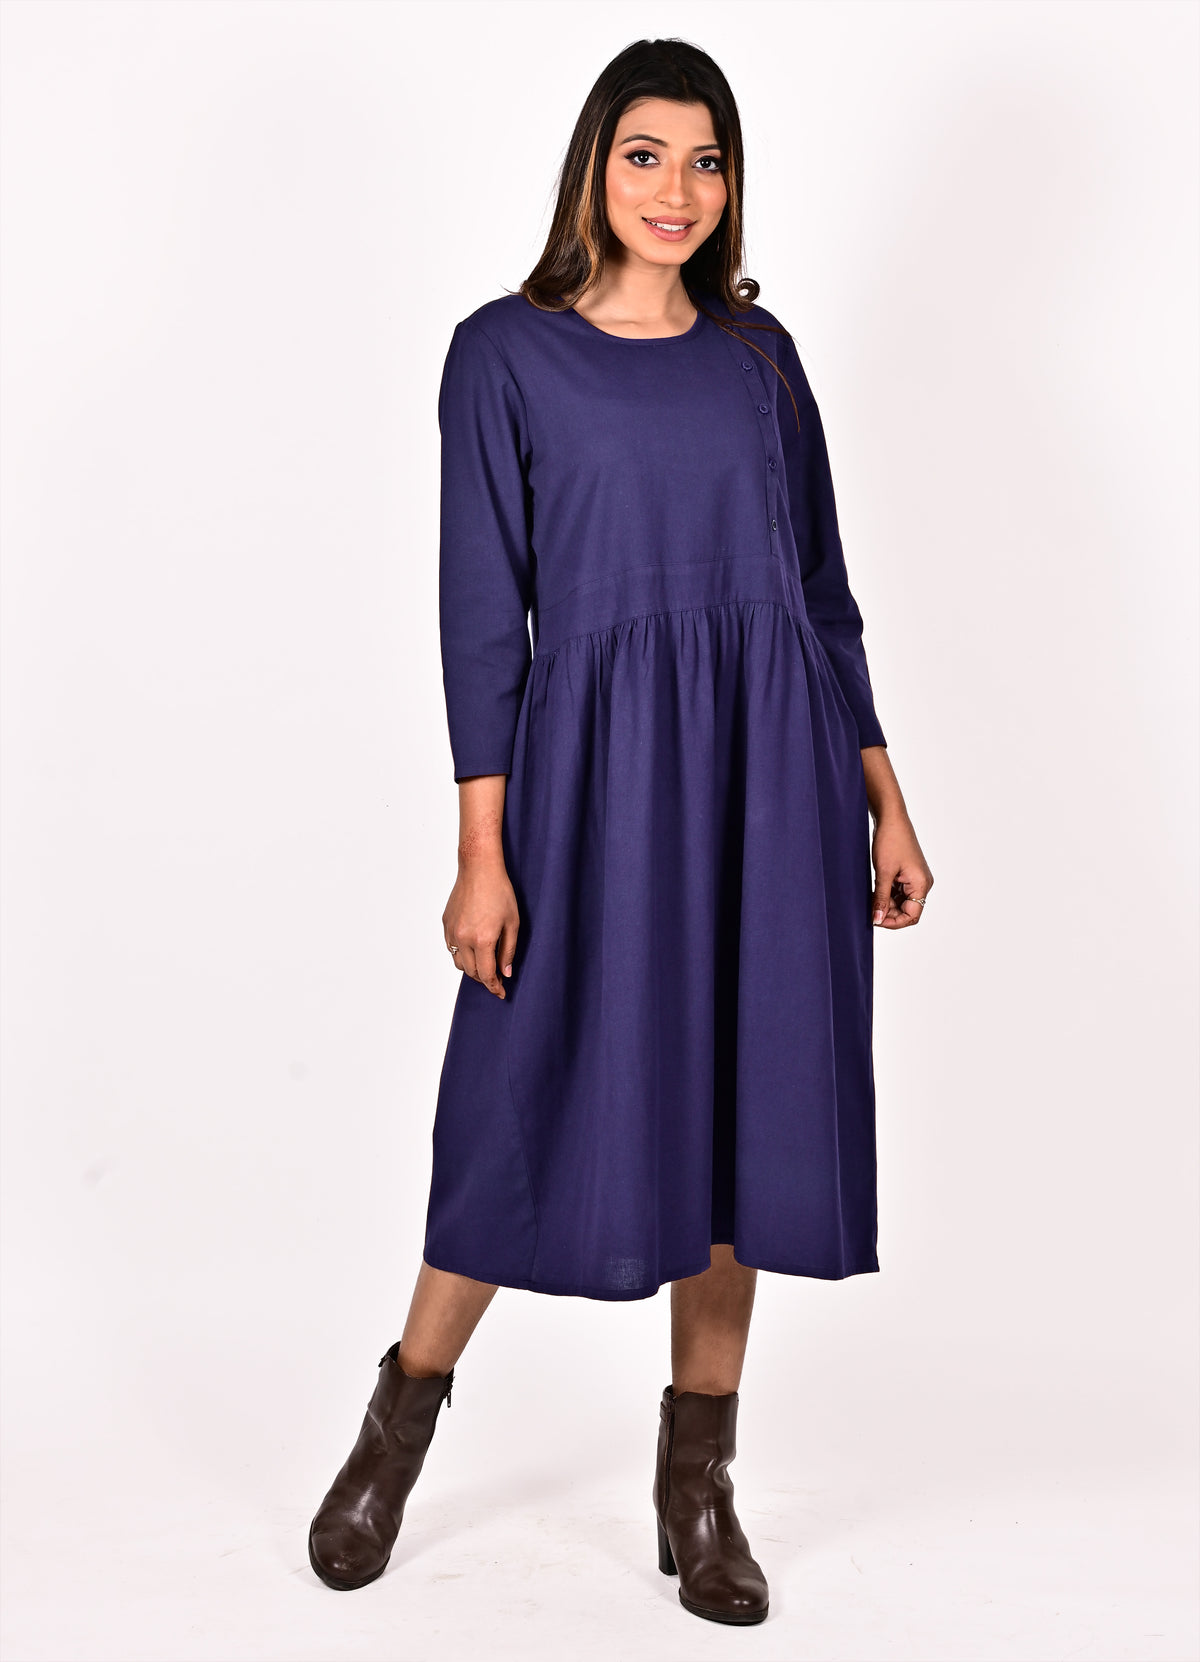 PULOMA Linen-Cotton Dress: Made to Order/Customizable